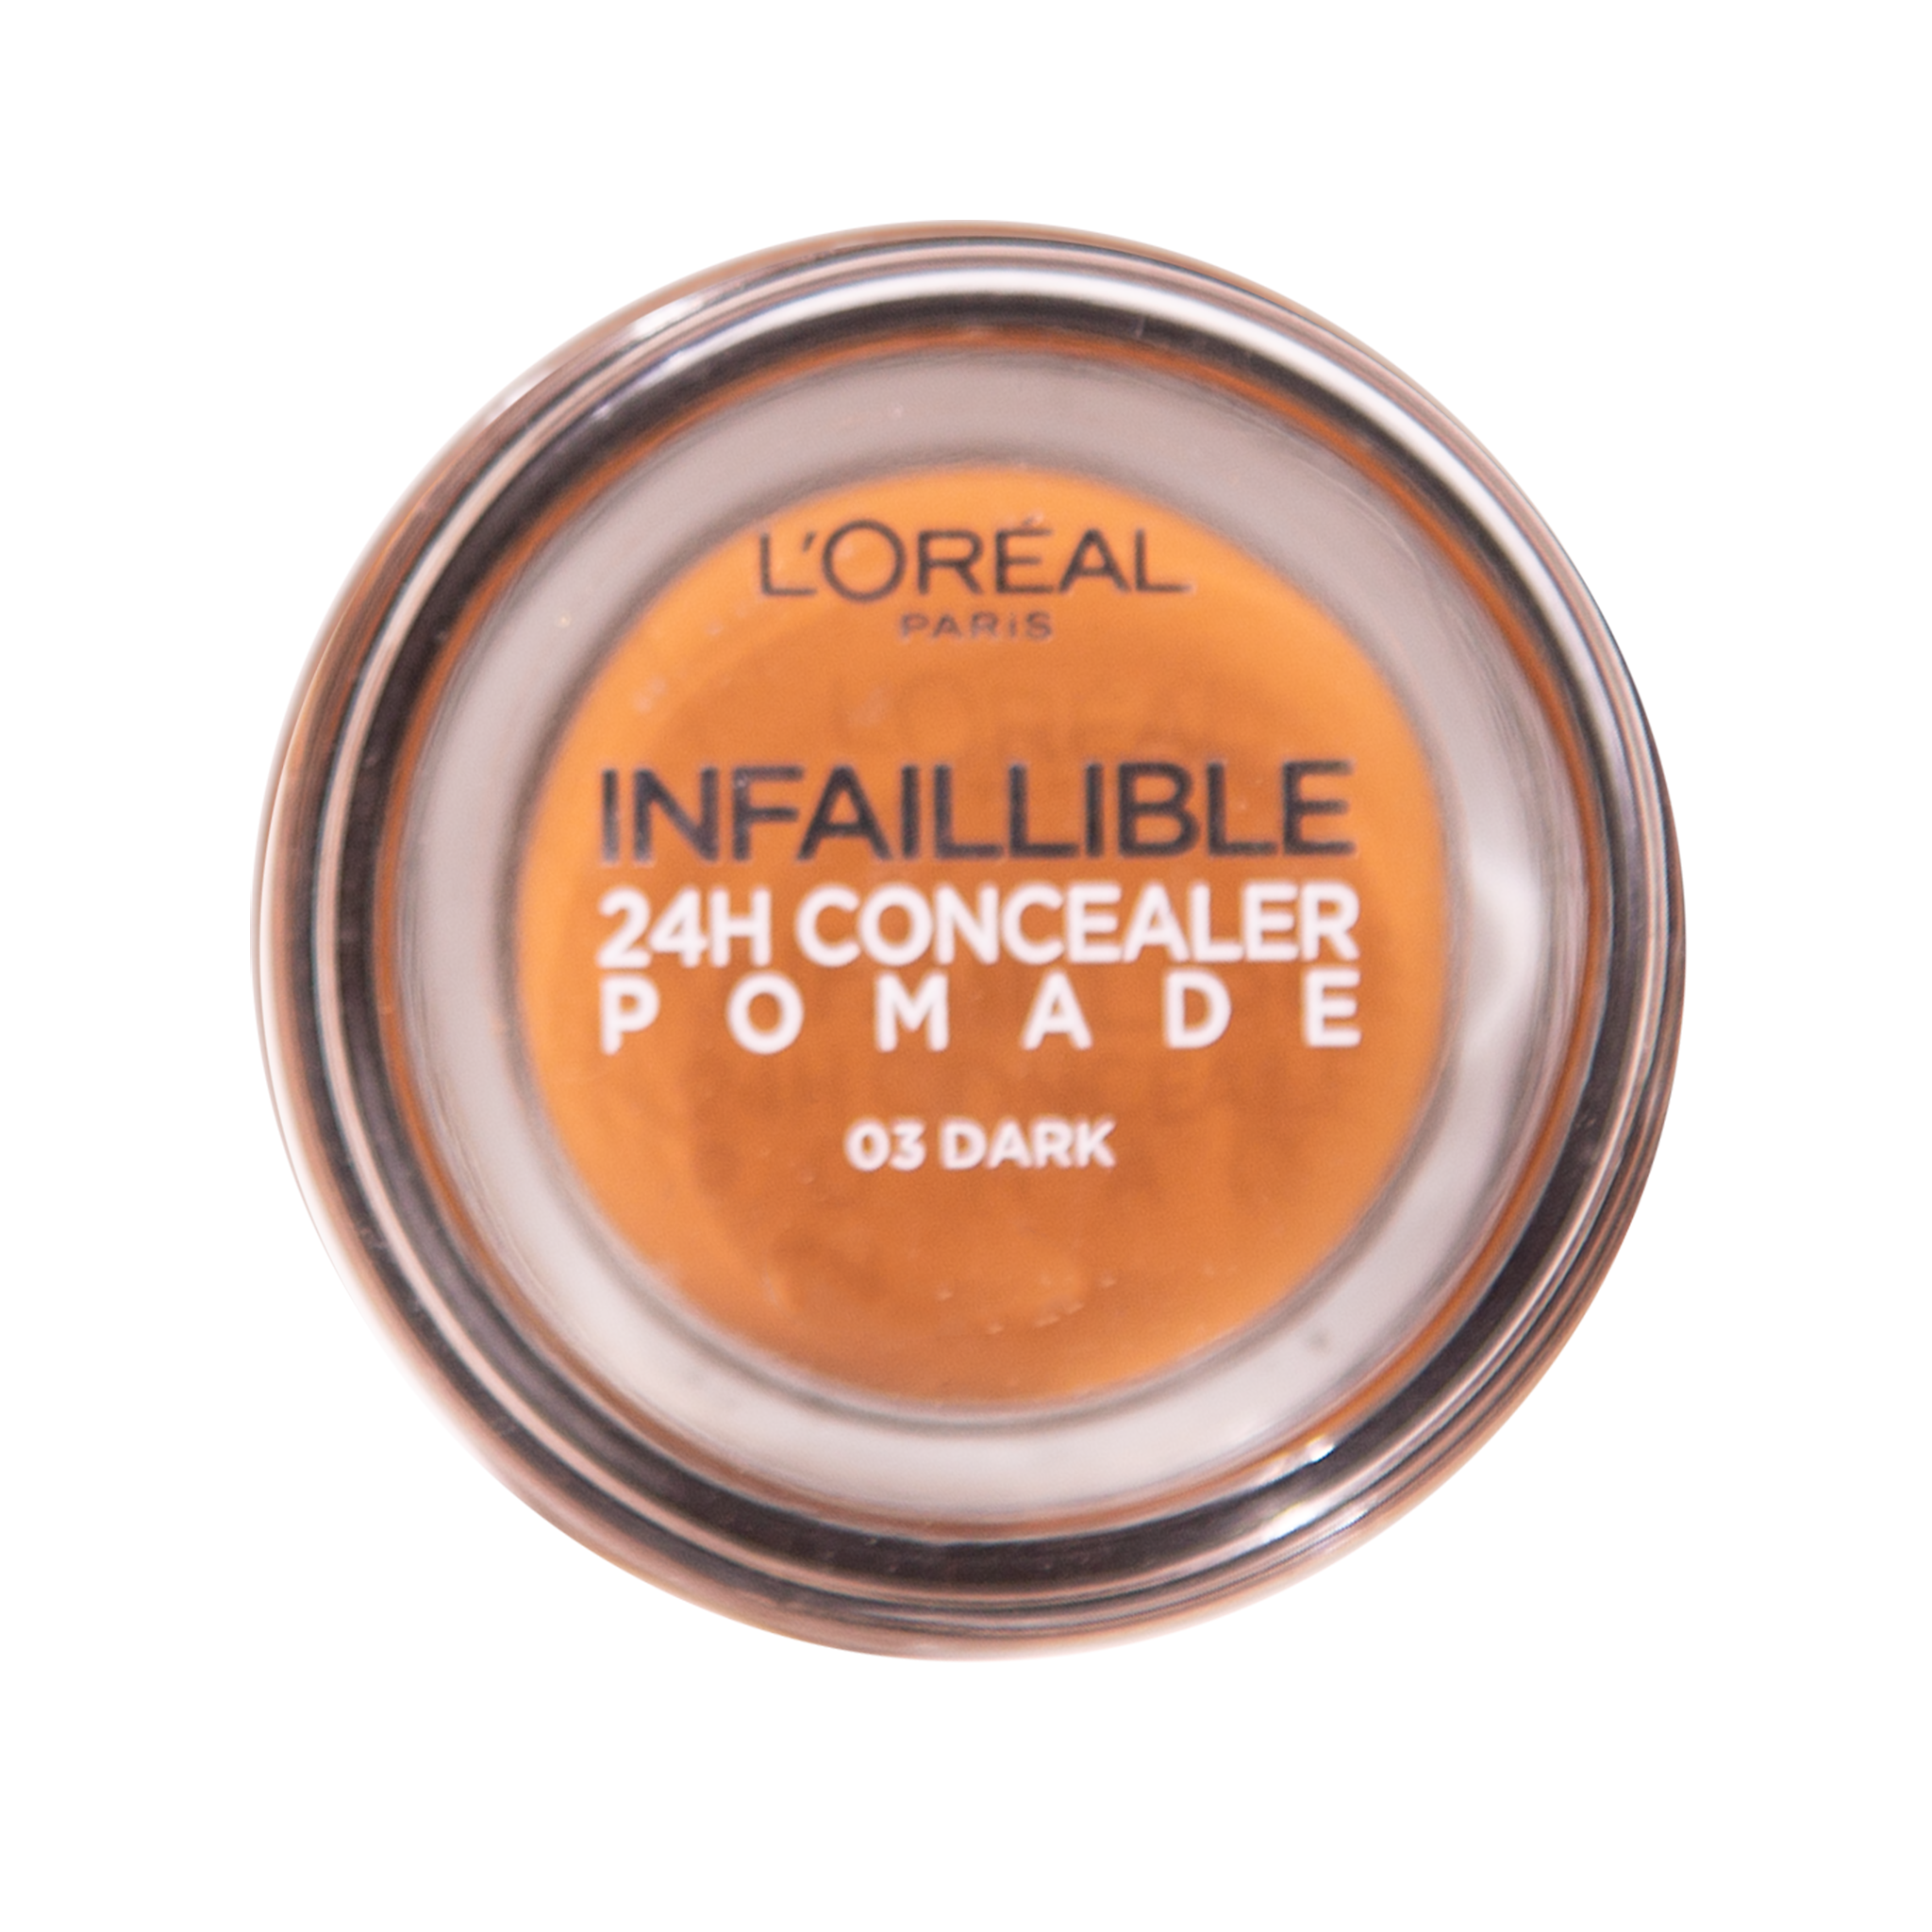 L'Oreal Infaillible 24H Concealer Pomade - 03 Dark